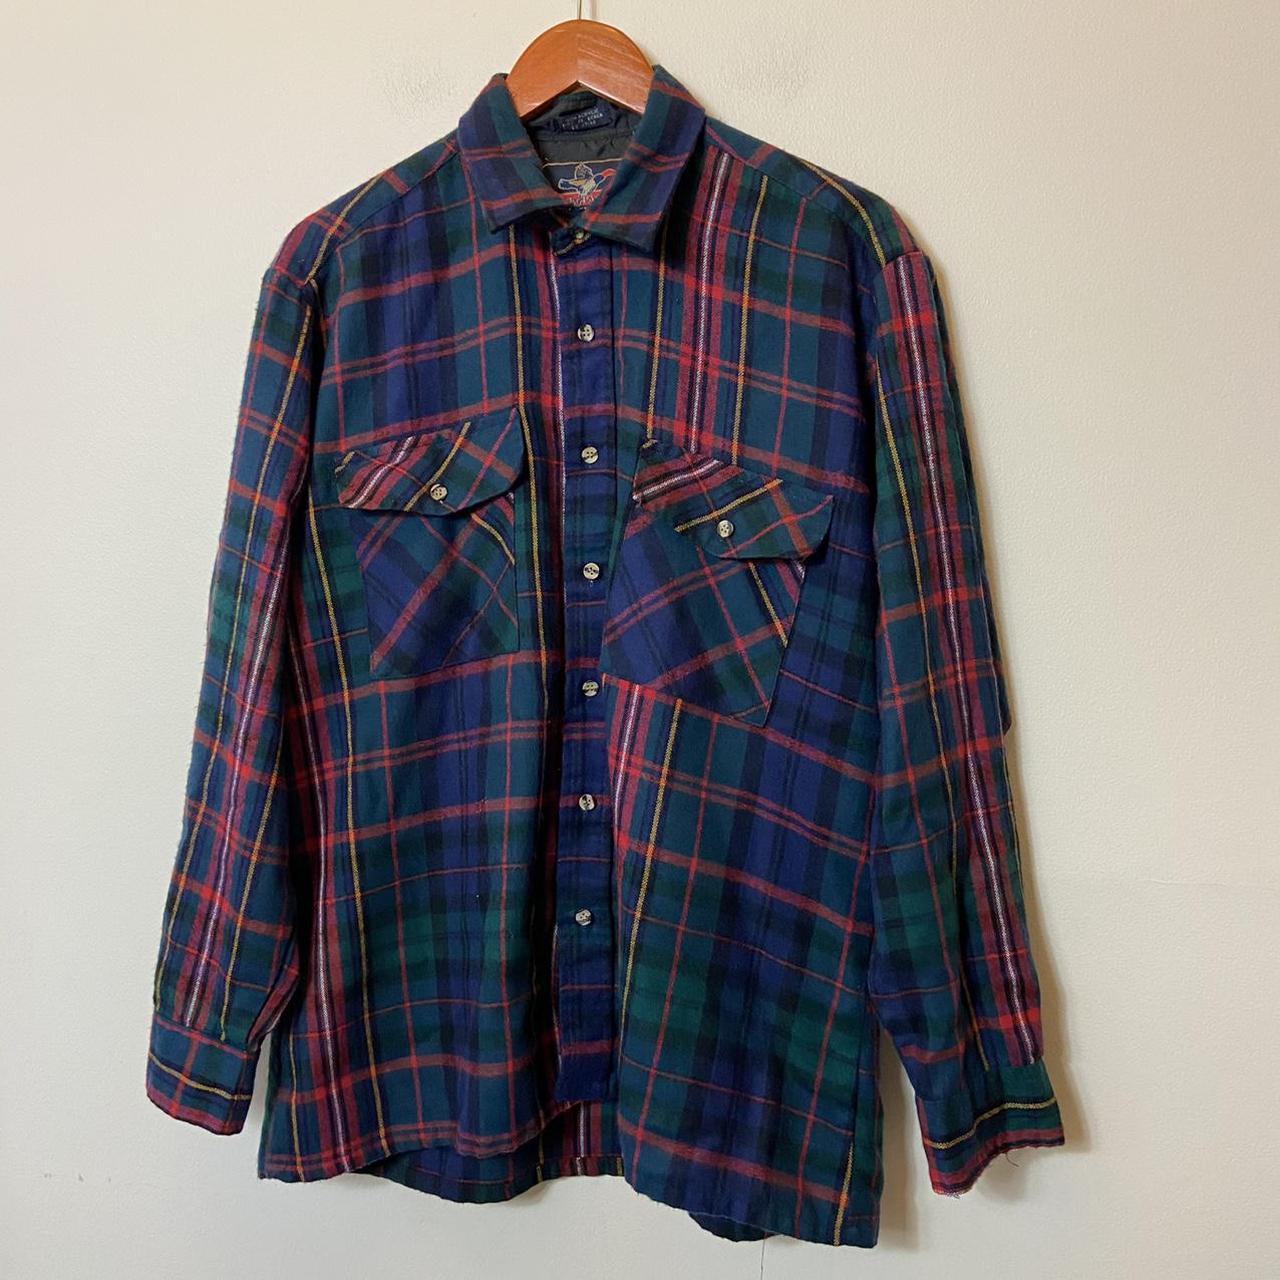 Product Image 1 - VINTAGE 1980s 1990s FLANNEL SHIRT